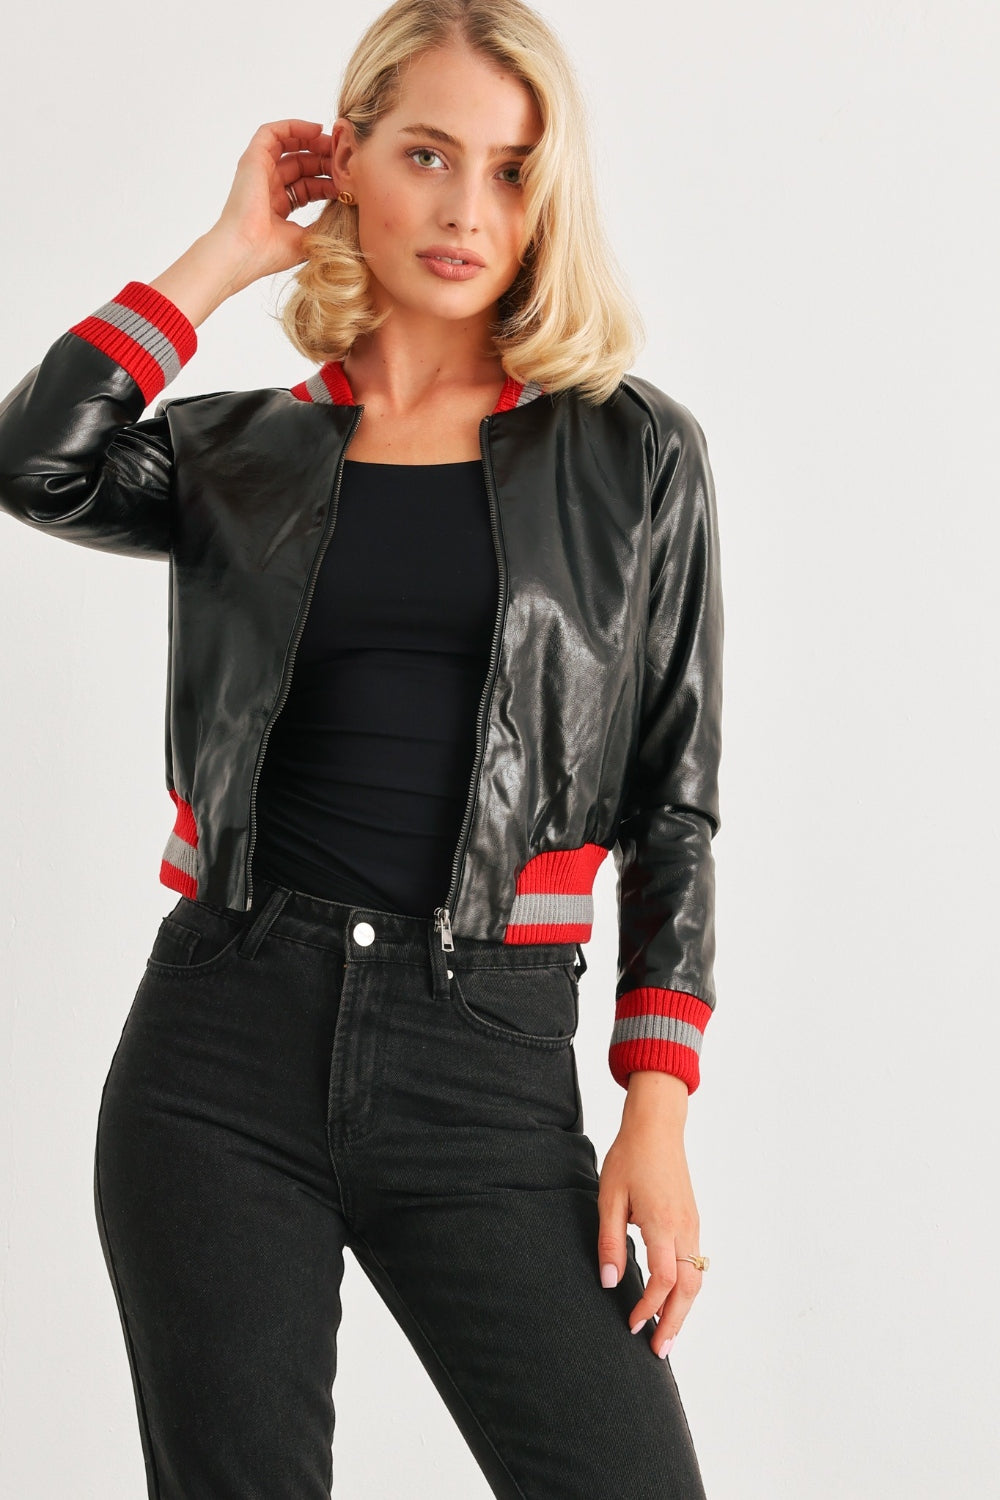 Comme PU Leather Baseball Collar Long Sleeve Jacket Casual Chic Boutique